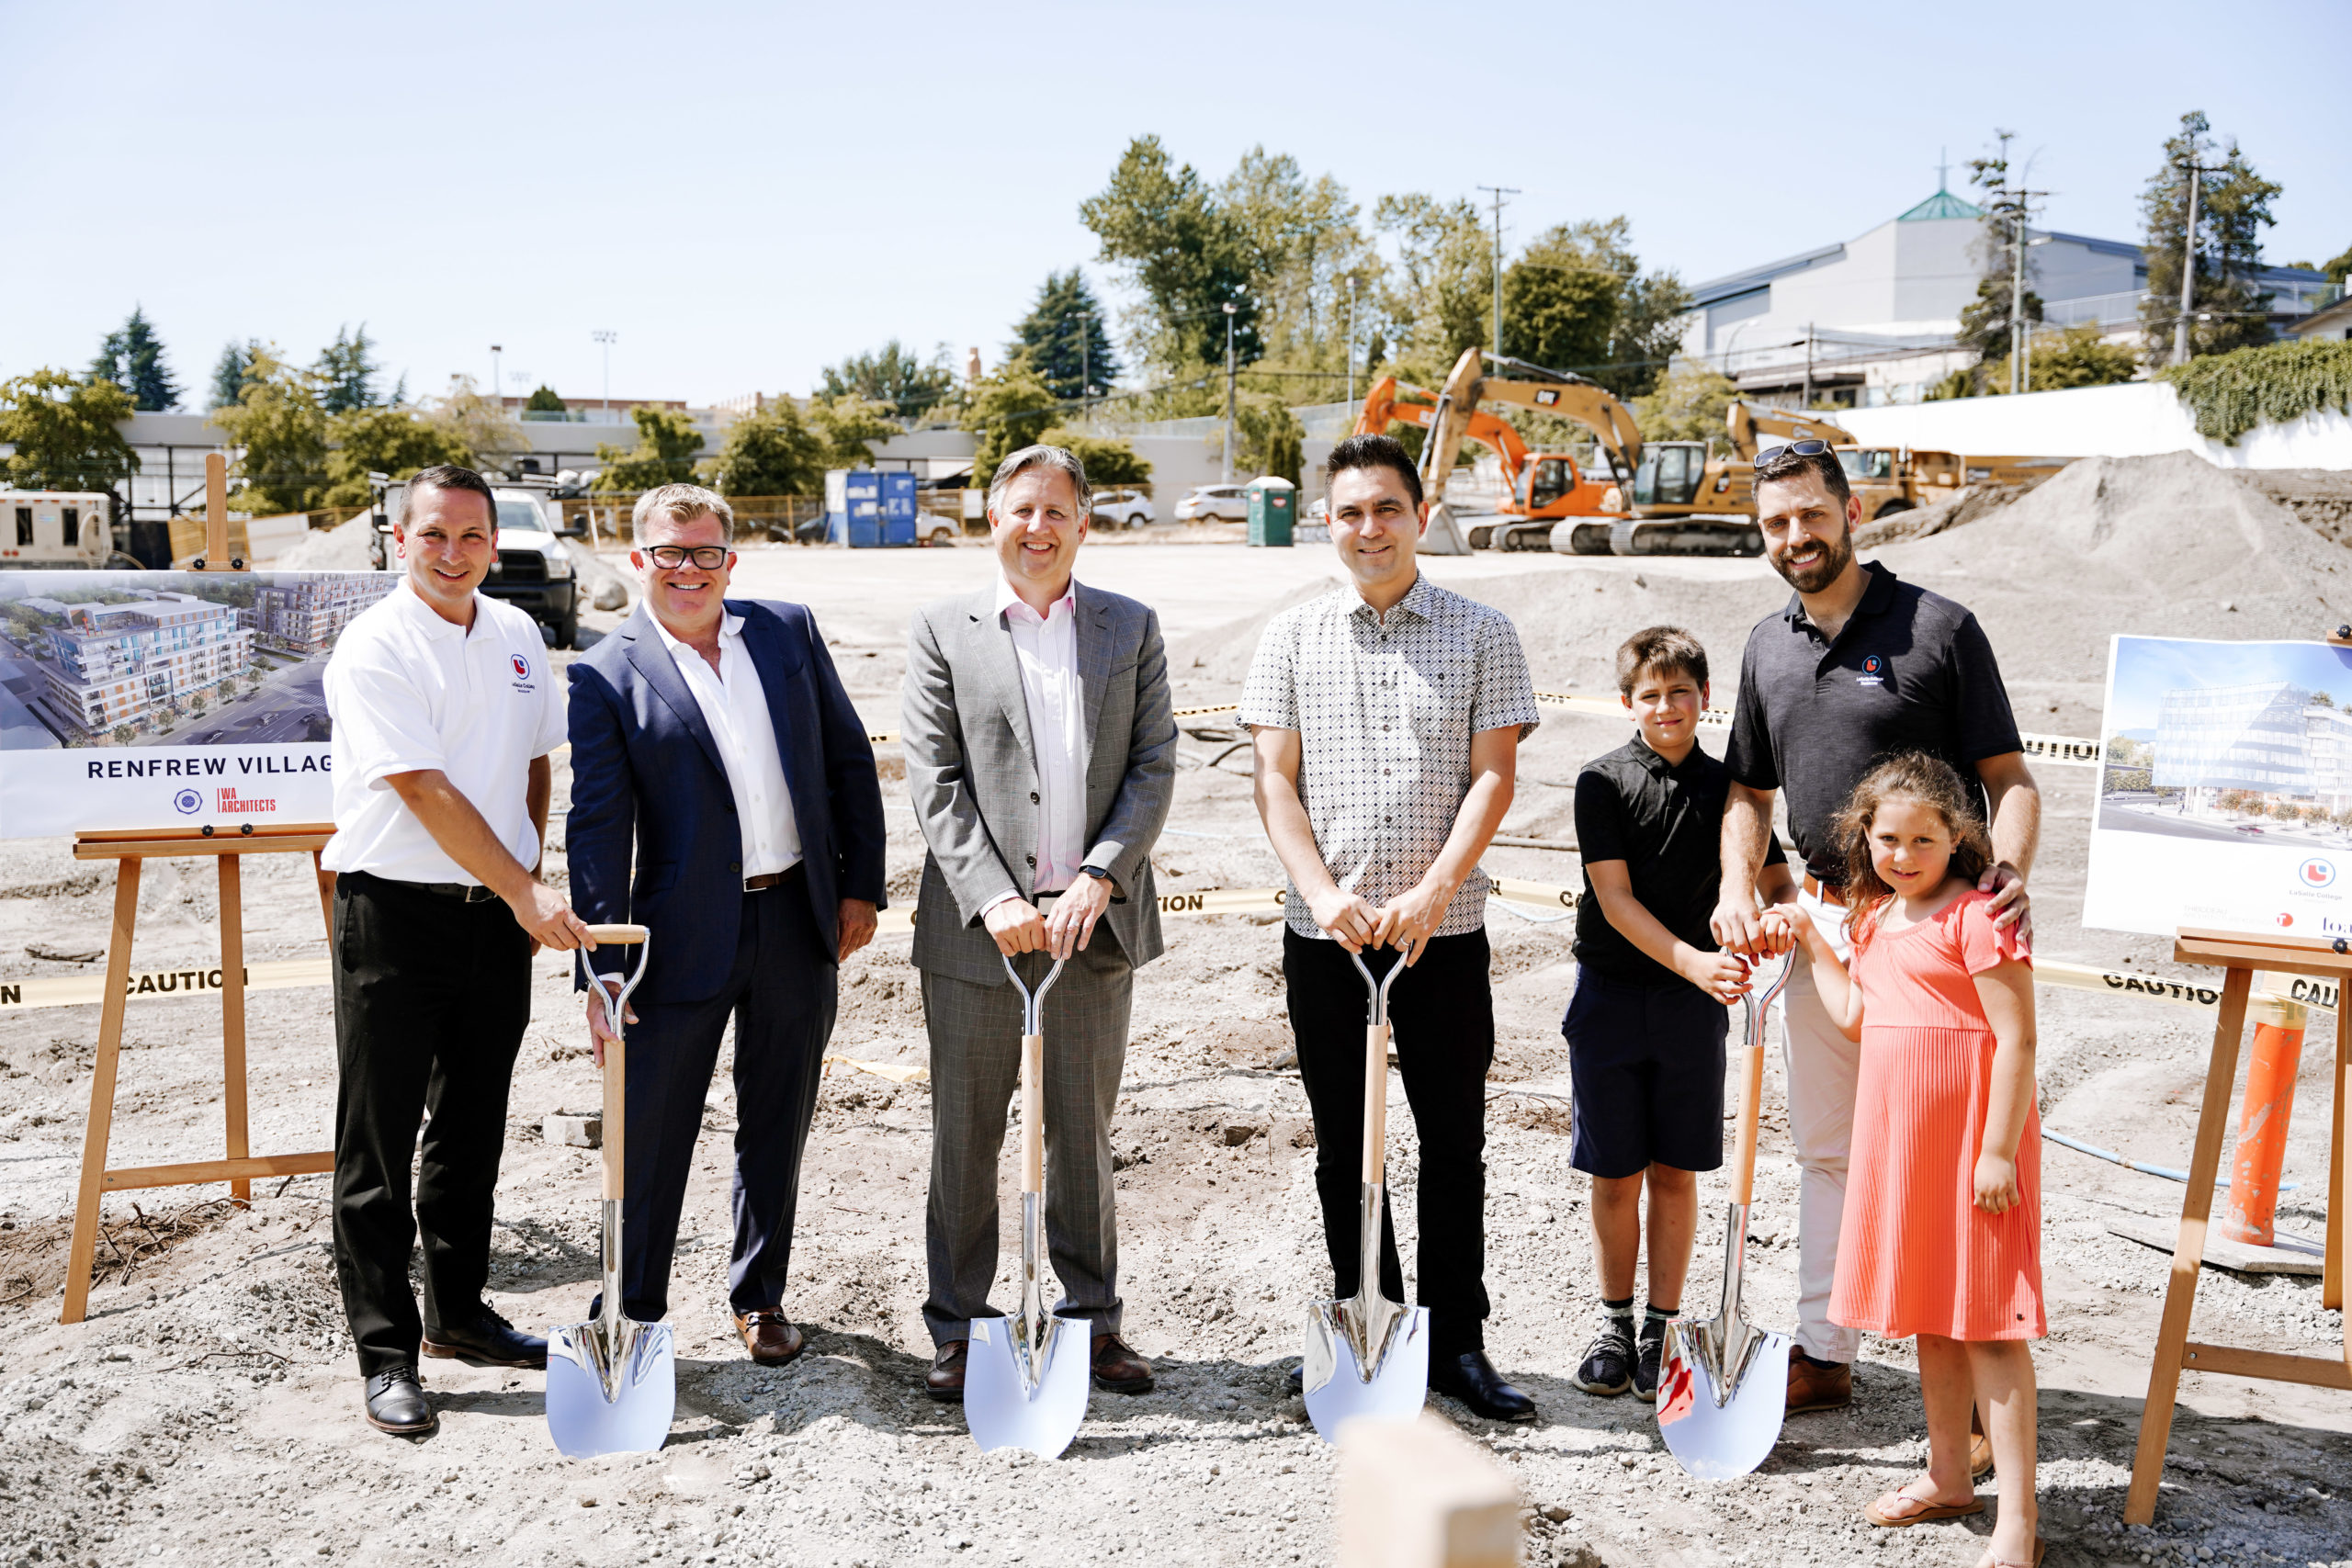 LaSalle College – Canada’s #1 Game Design School – Breaks Ground on their Future Campus in Vancouver